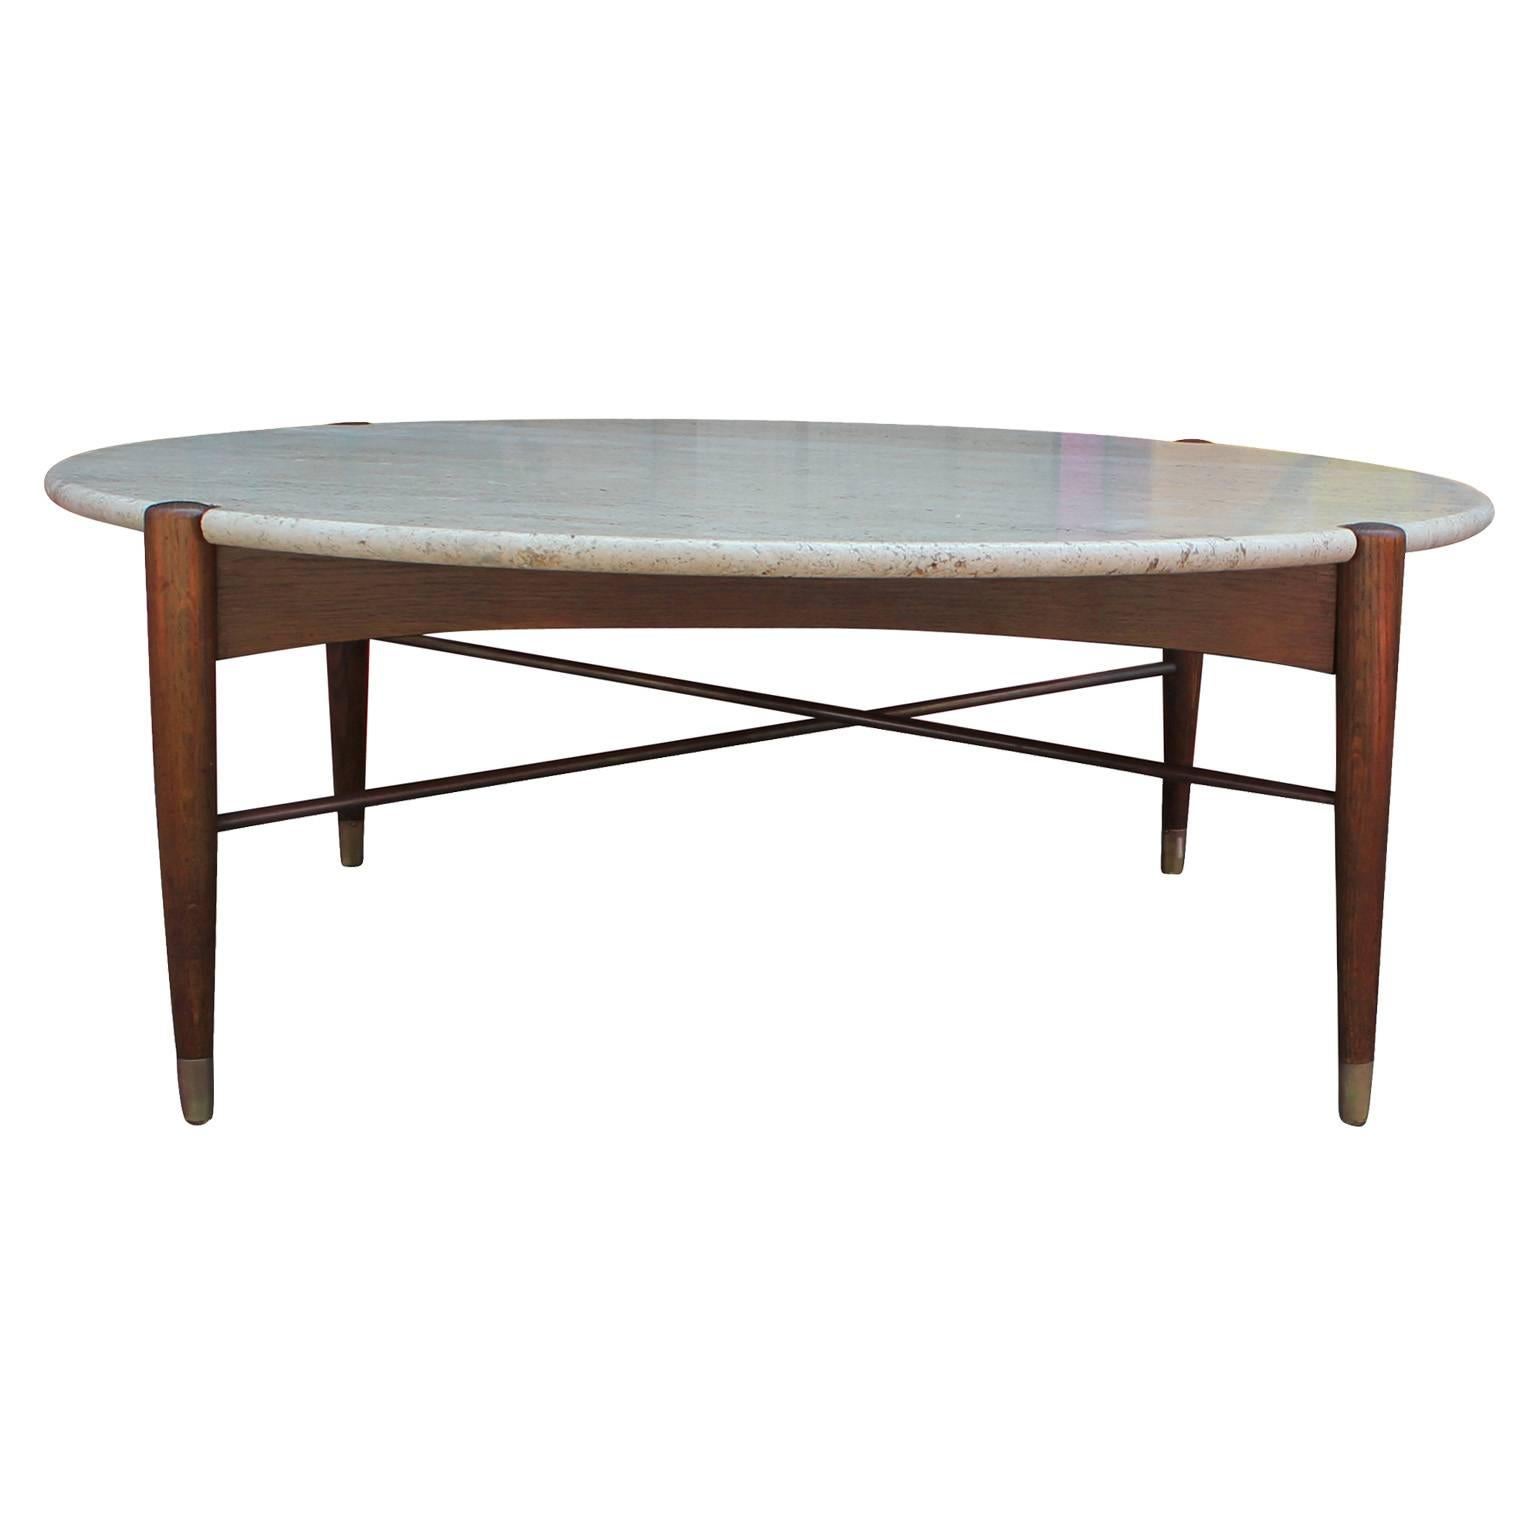 Beautiful round coffee table by DUX attributed to Bruno Mathsson. Travertine top has a beautiful grain. Sculptural walnut base with X-stretcher. Tapered legs are capped in brass. Excellent in a Mid-Century, transitional, or Scandinavian Modern